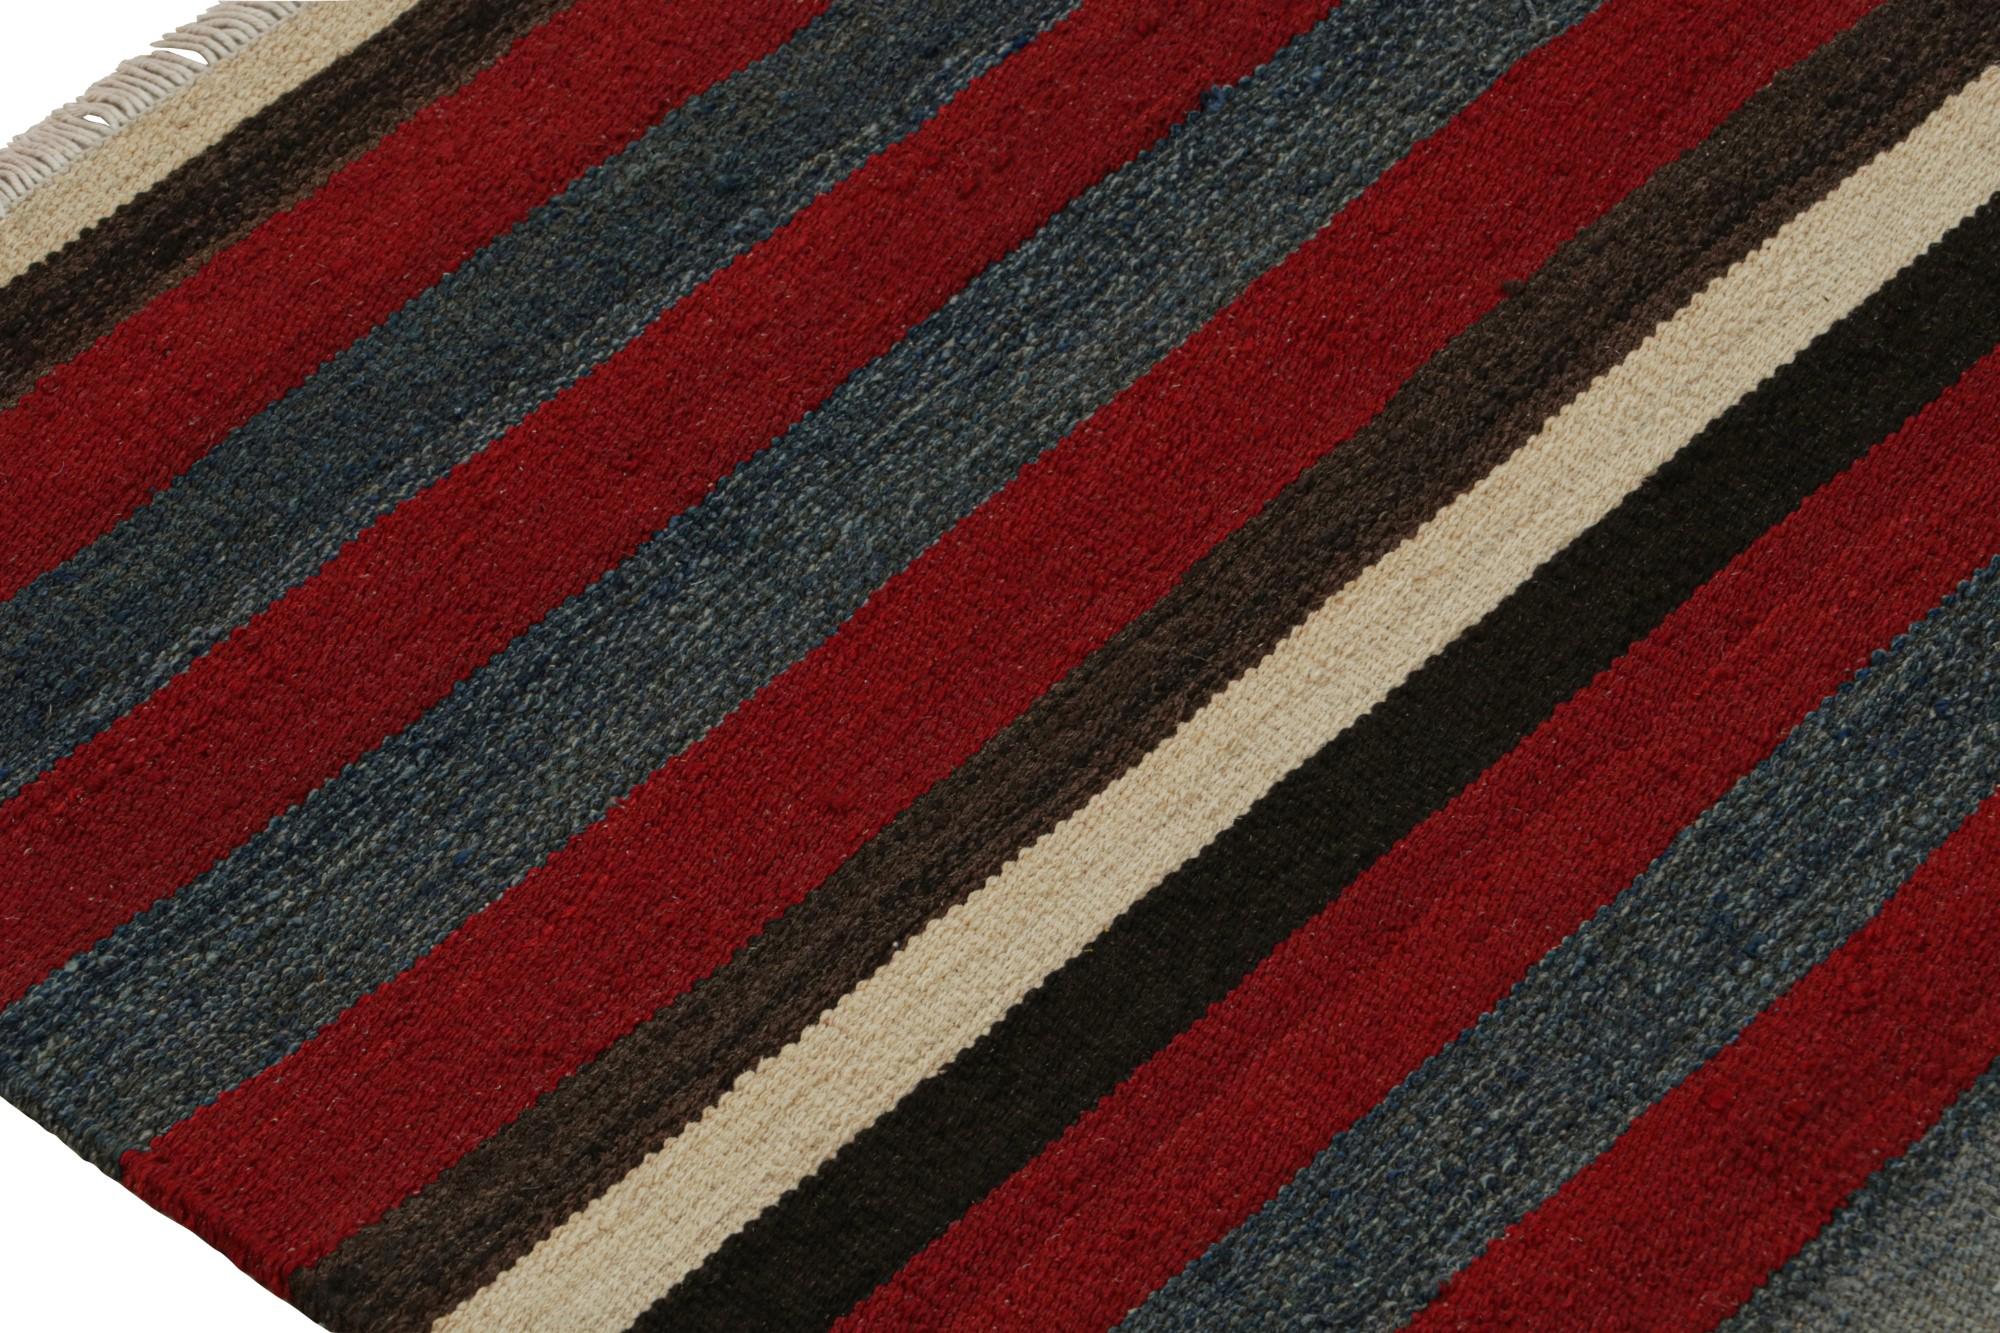 Rug & Kilim’s Afghan Tribal Kilim Rug in Red with Geometric Striped Patterns In New Condition For Sale In Long Island City, NY